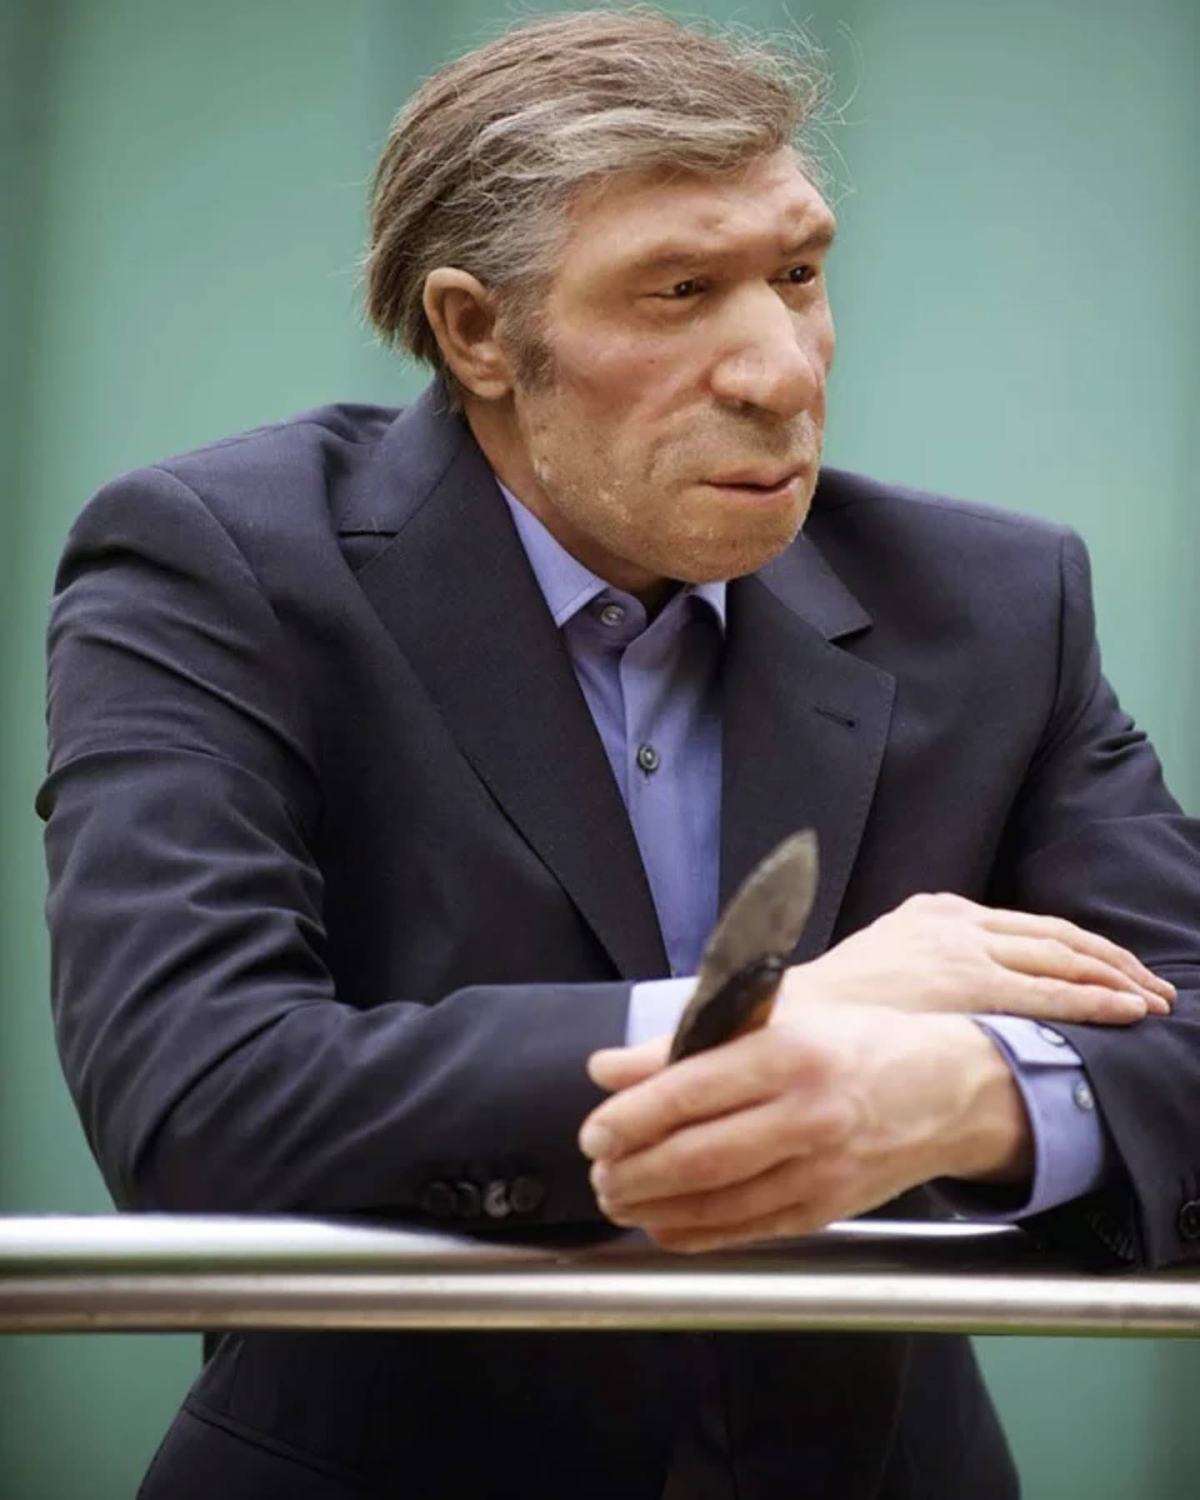 A Neanderthal in Suite and Tie